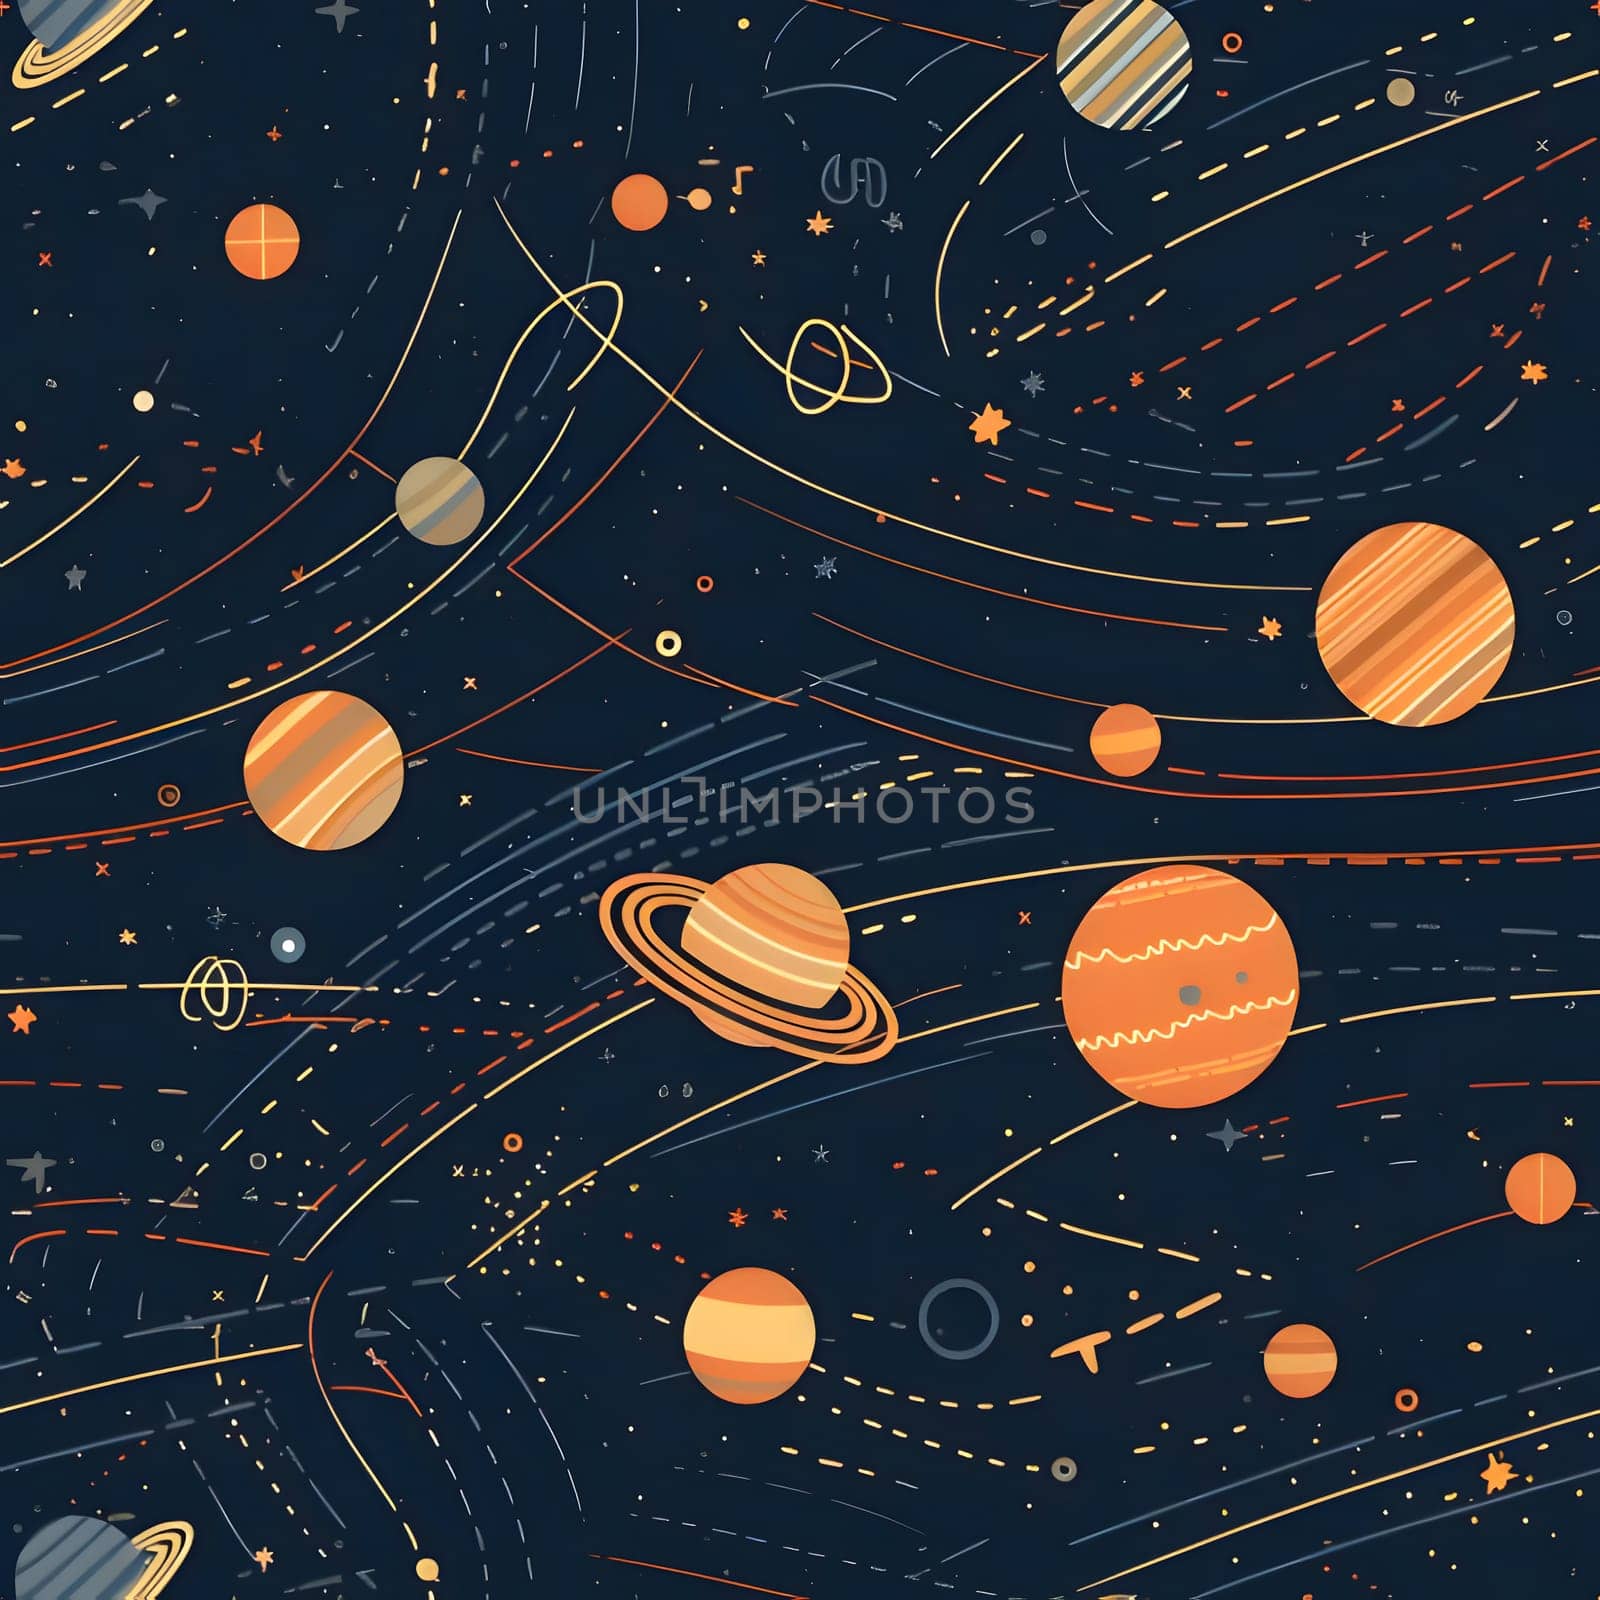 Patterns and banners backgrounds: Seamless pattern with planets and stars in space. Vector illustration.